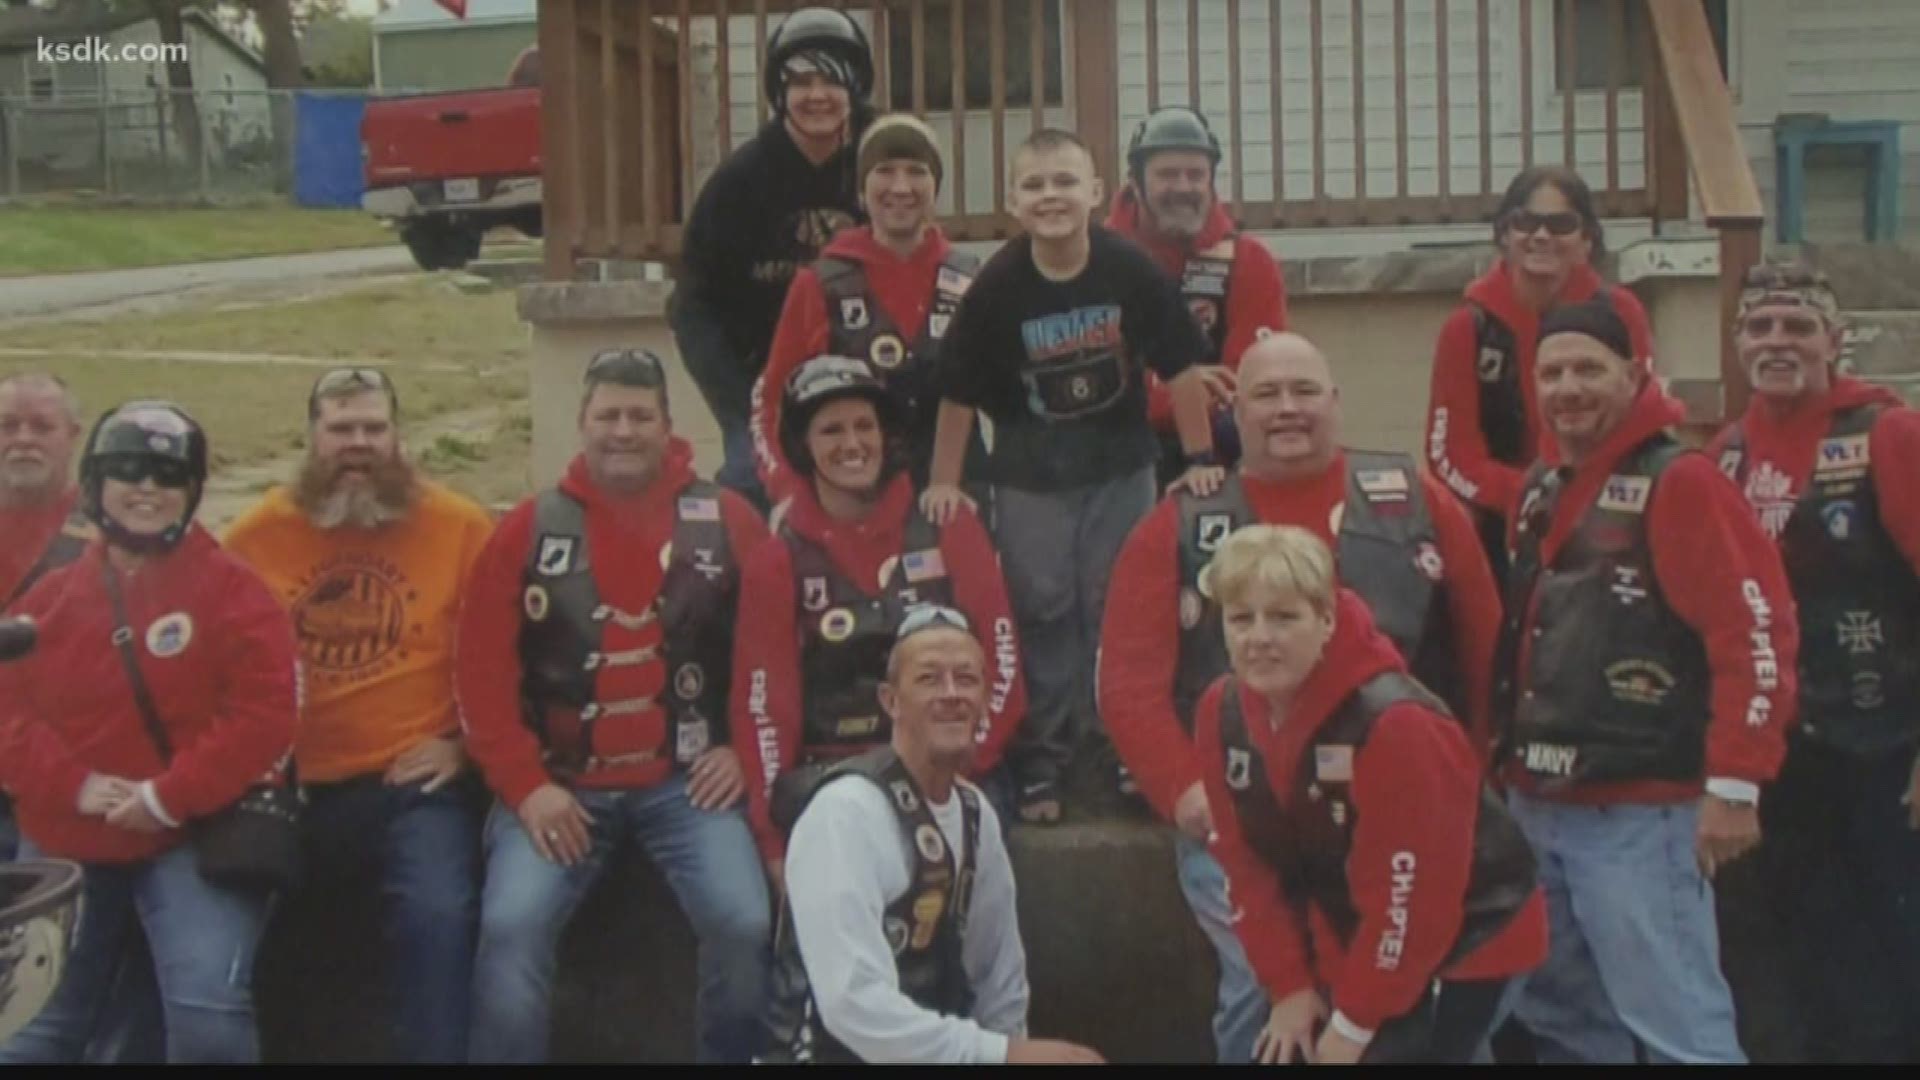 Aiden has autism and he loves motorcycles. So a group of local Amvet Riders surprised him for his eighth birthday.